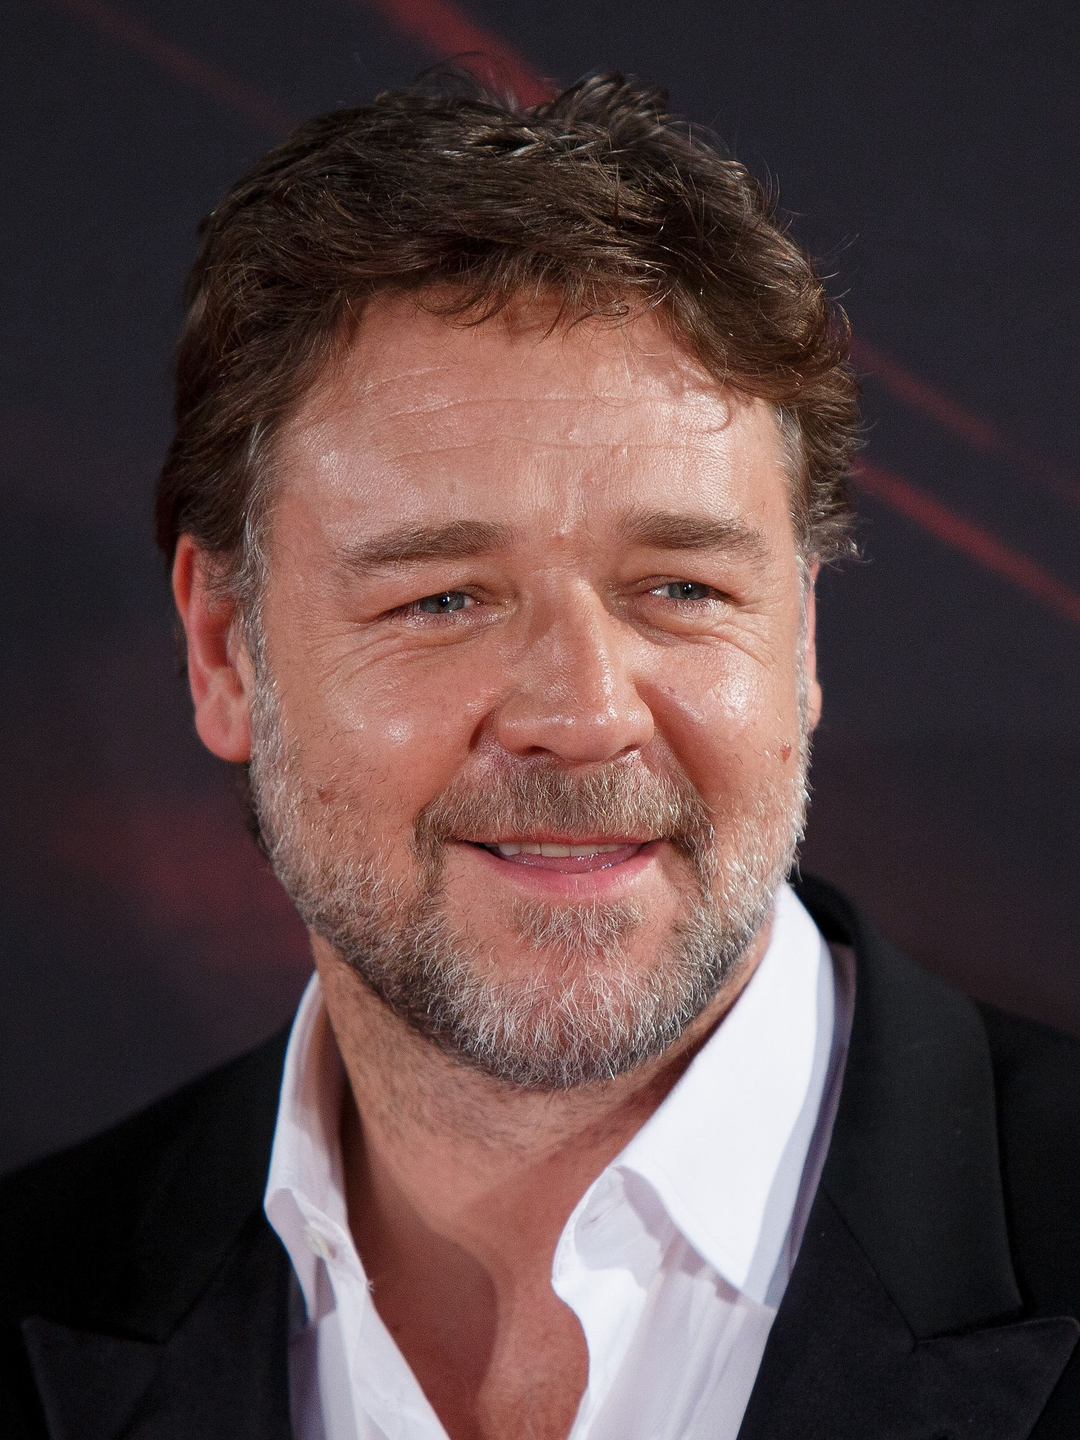 Russell Crowe early life